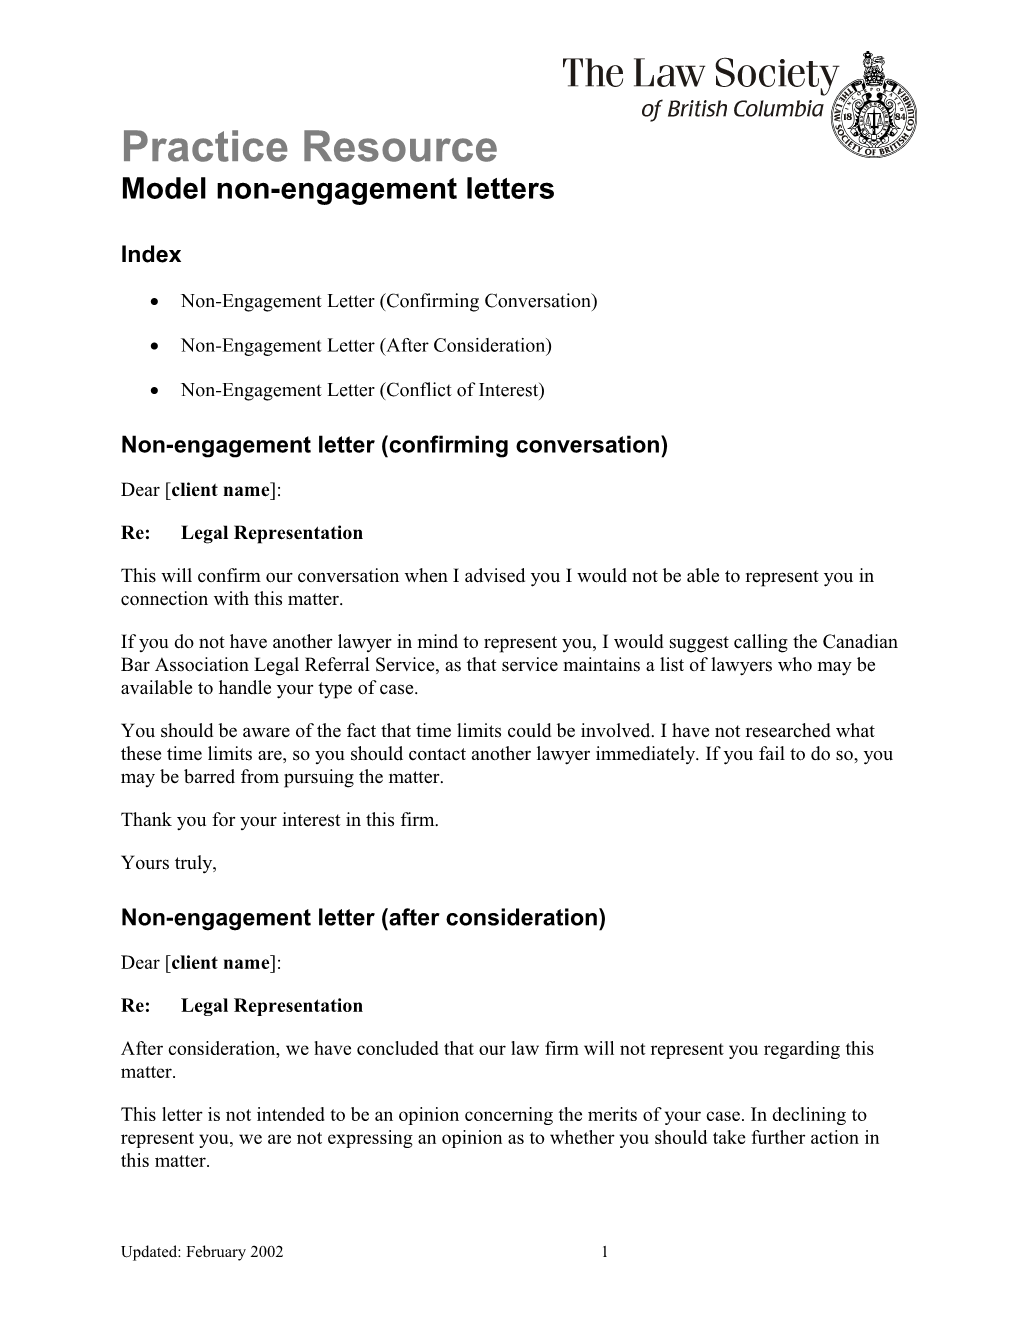 Practice Resource: Model Non-Engagement Letters